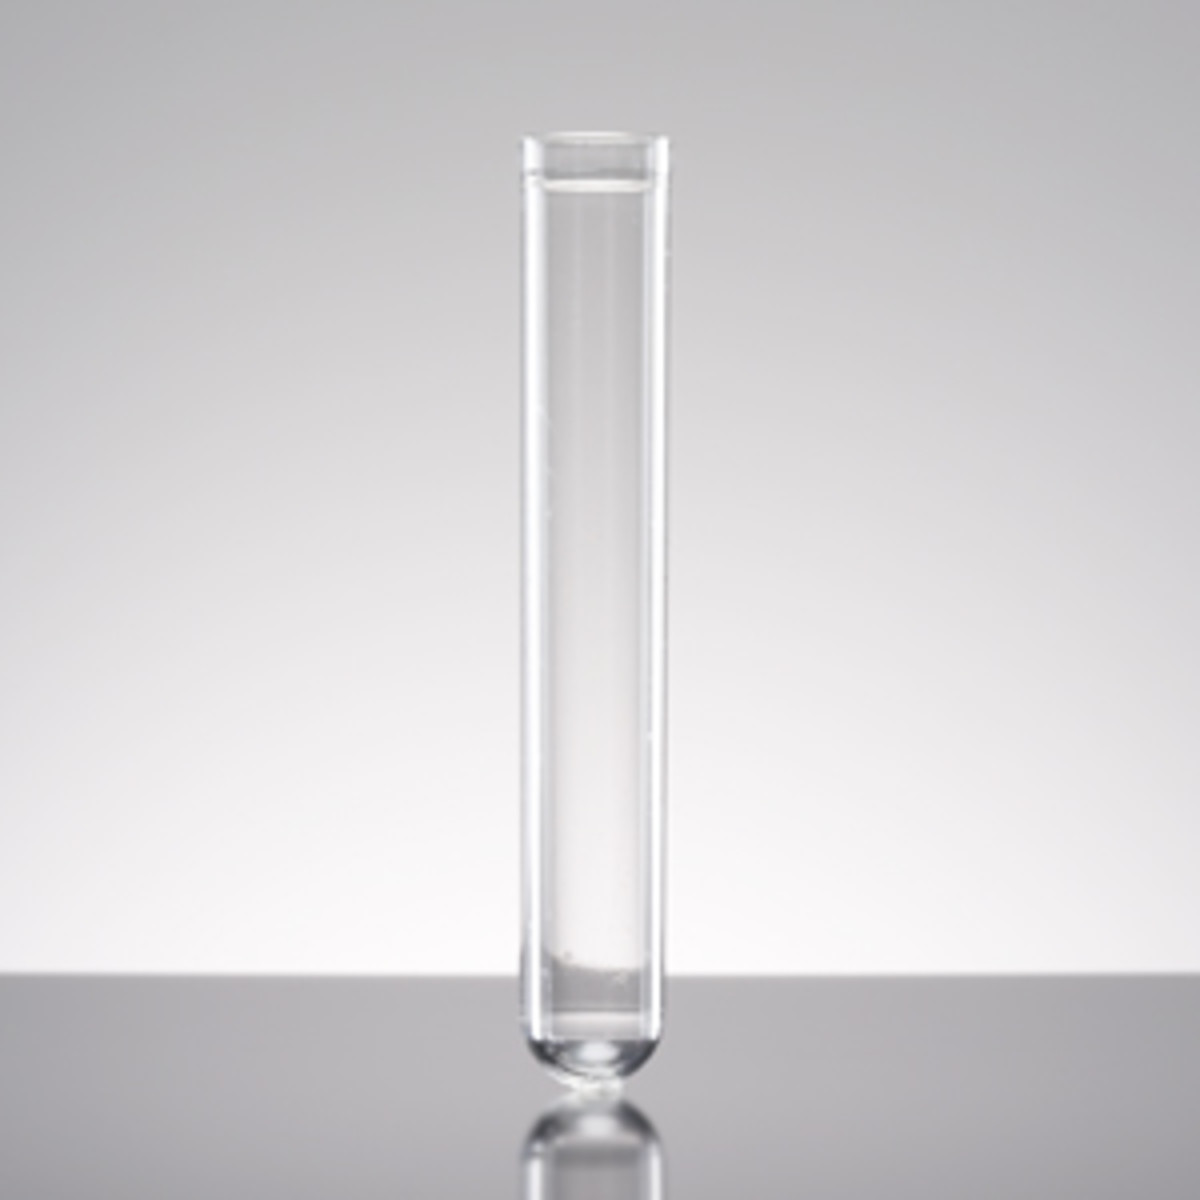 Glass Test Tube Vases Of Falcona 5 Ml Round Bottom Polystyrene Test Tube without Cap with Regard to Falcona 5 Ml Round Bottom Polystyrene Test Tube without Cap Sterile 125